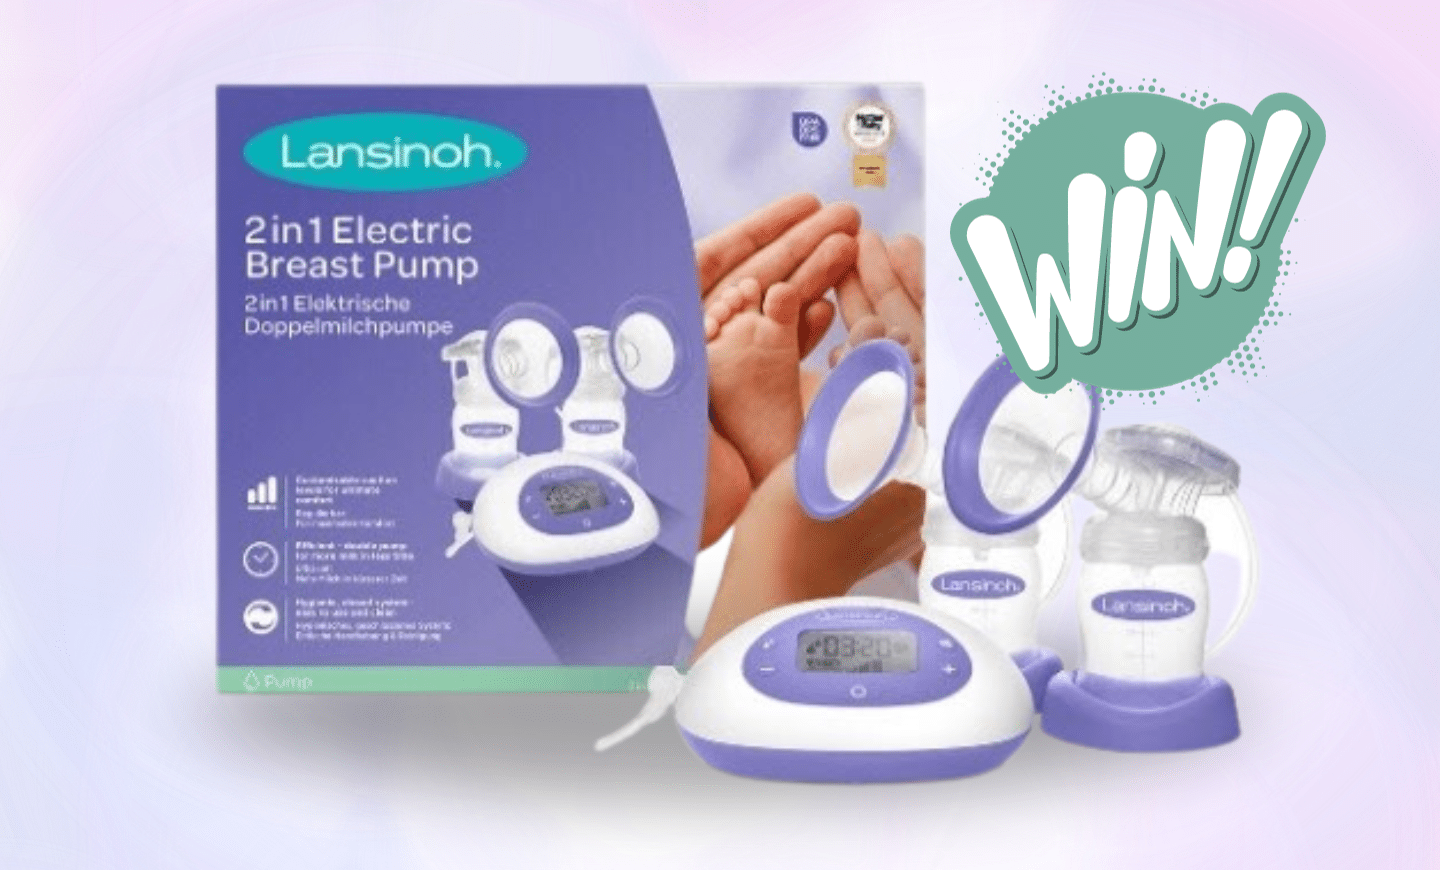 Lansinoh 2-in-1 Breast Pump Competition